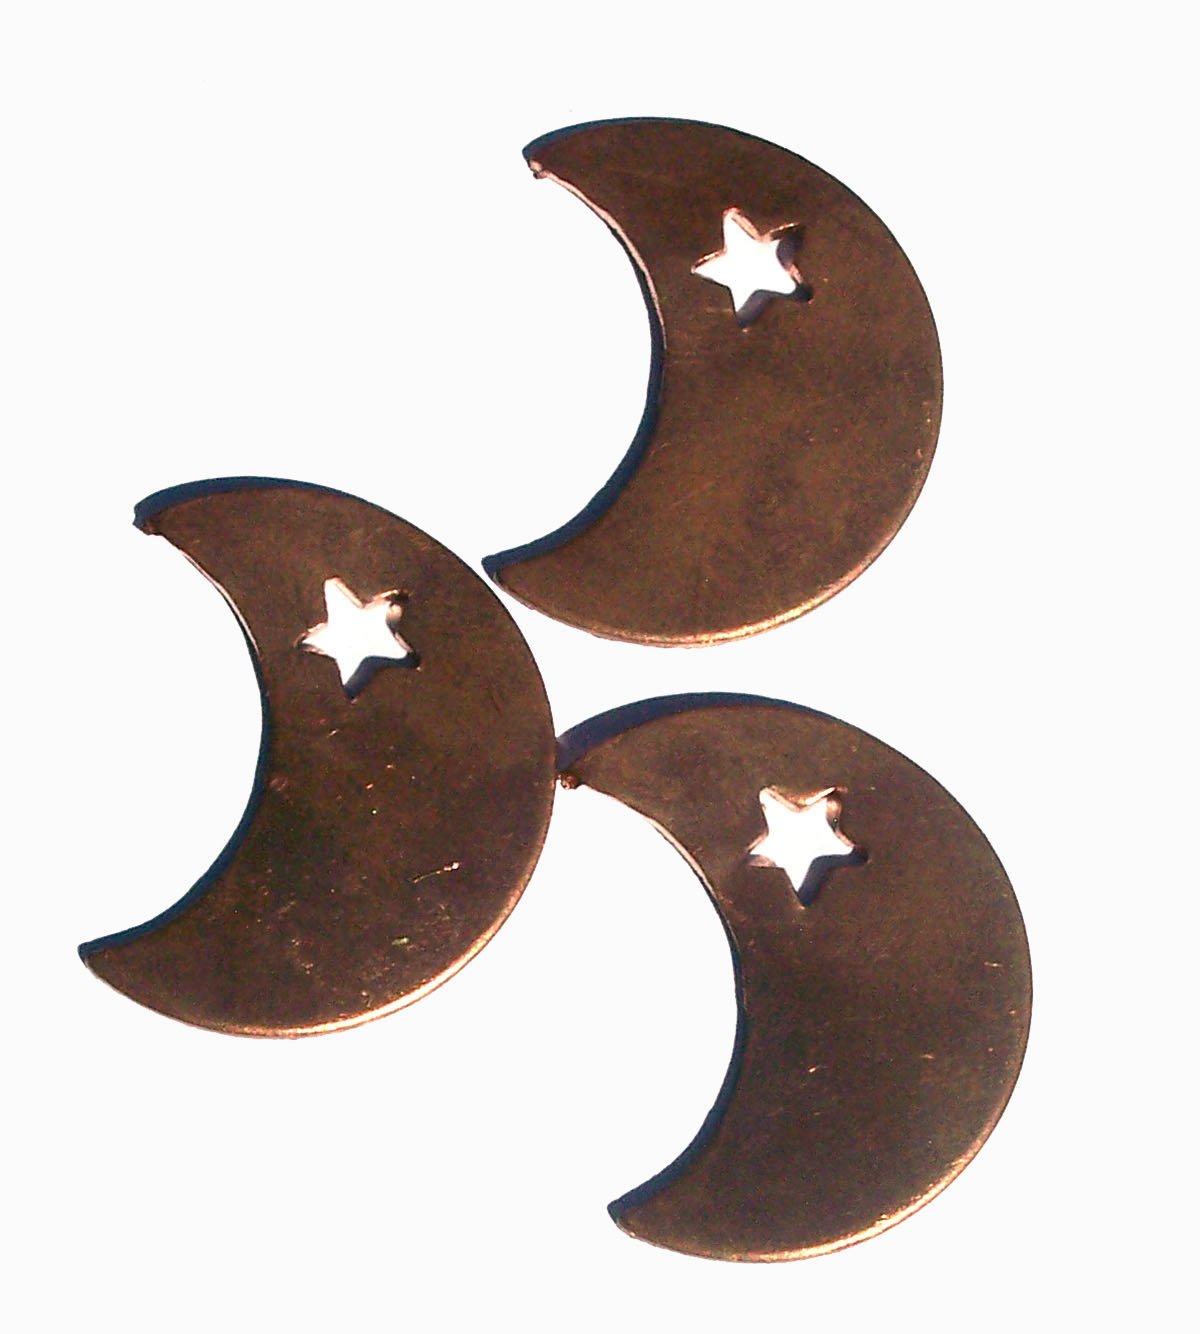 Copper or Brass or Bronze or Nickel Silver Moon with Star 20g Blanks Cutout for Enameling Stamping Texturing 3/4 inch (DCH)